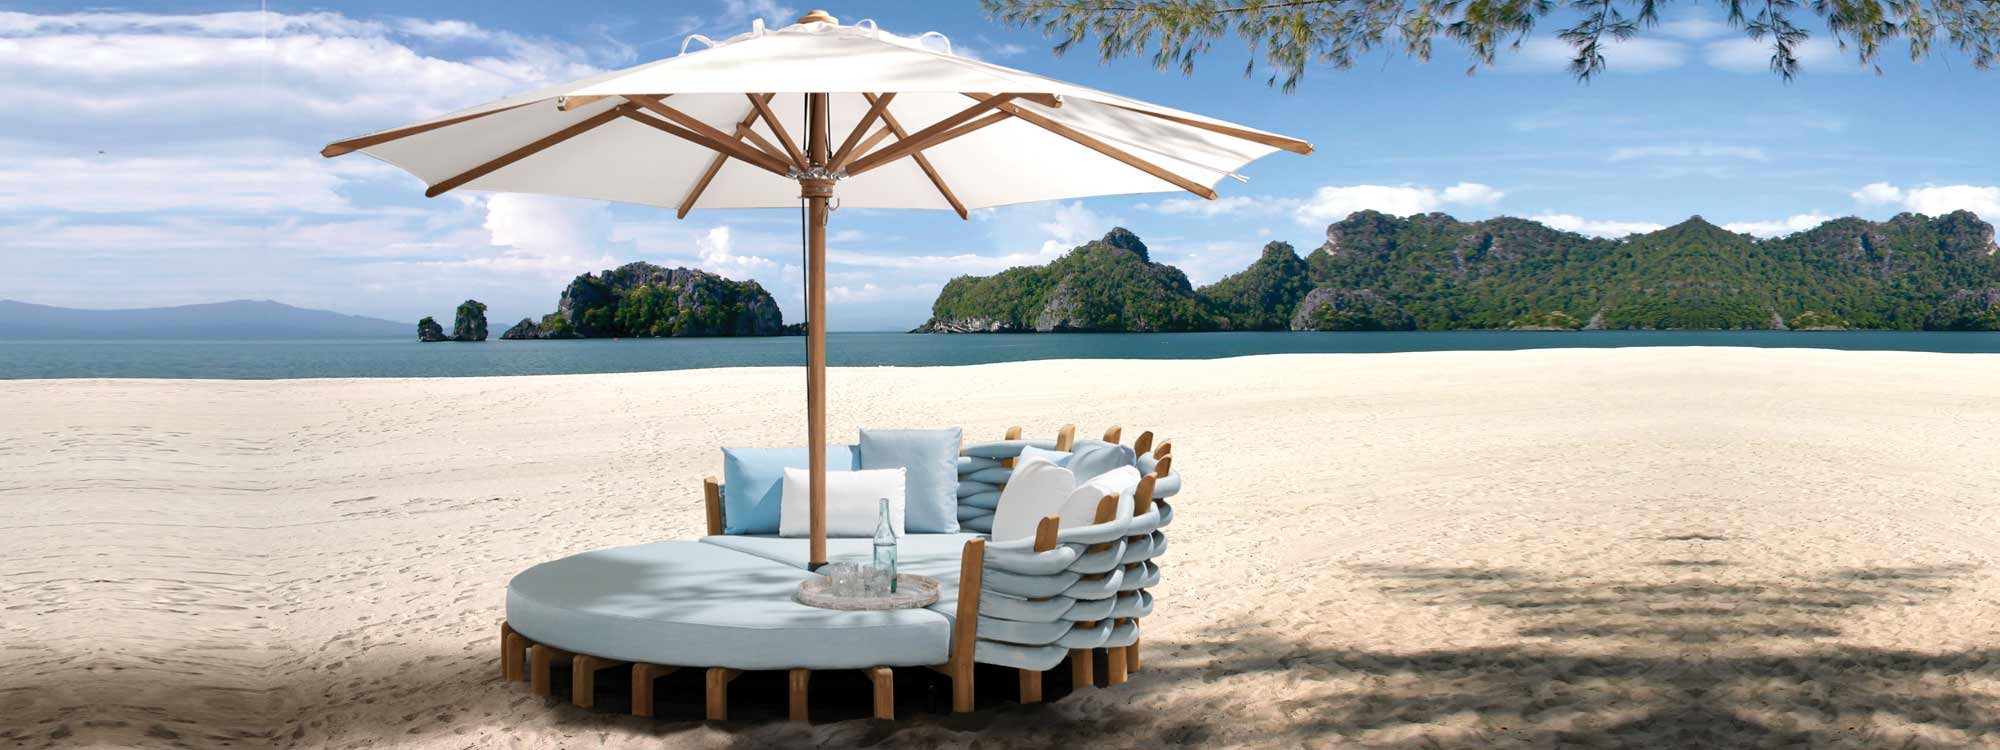 Image of Royal Botania Lotus modern garden day bed with sky blue cushions and white Shady Teak parasol on sandy beach.